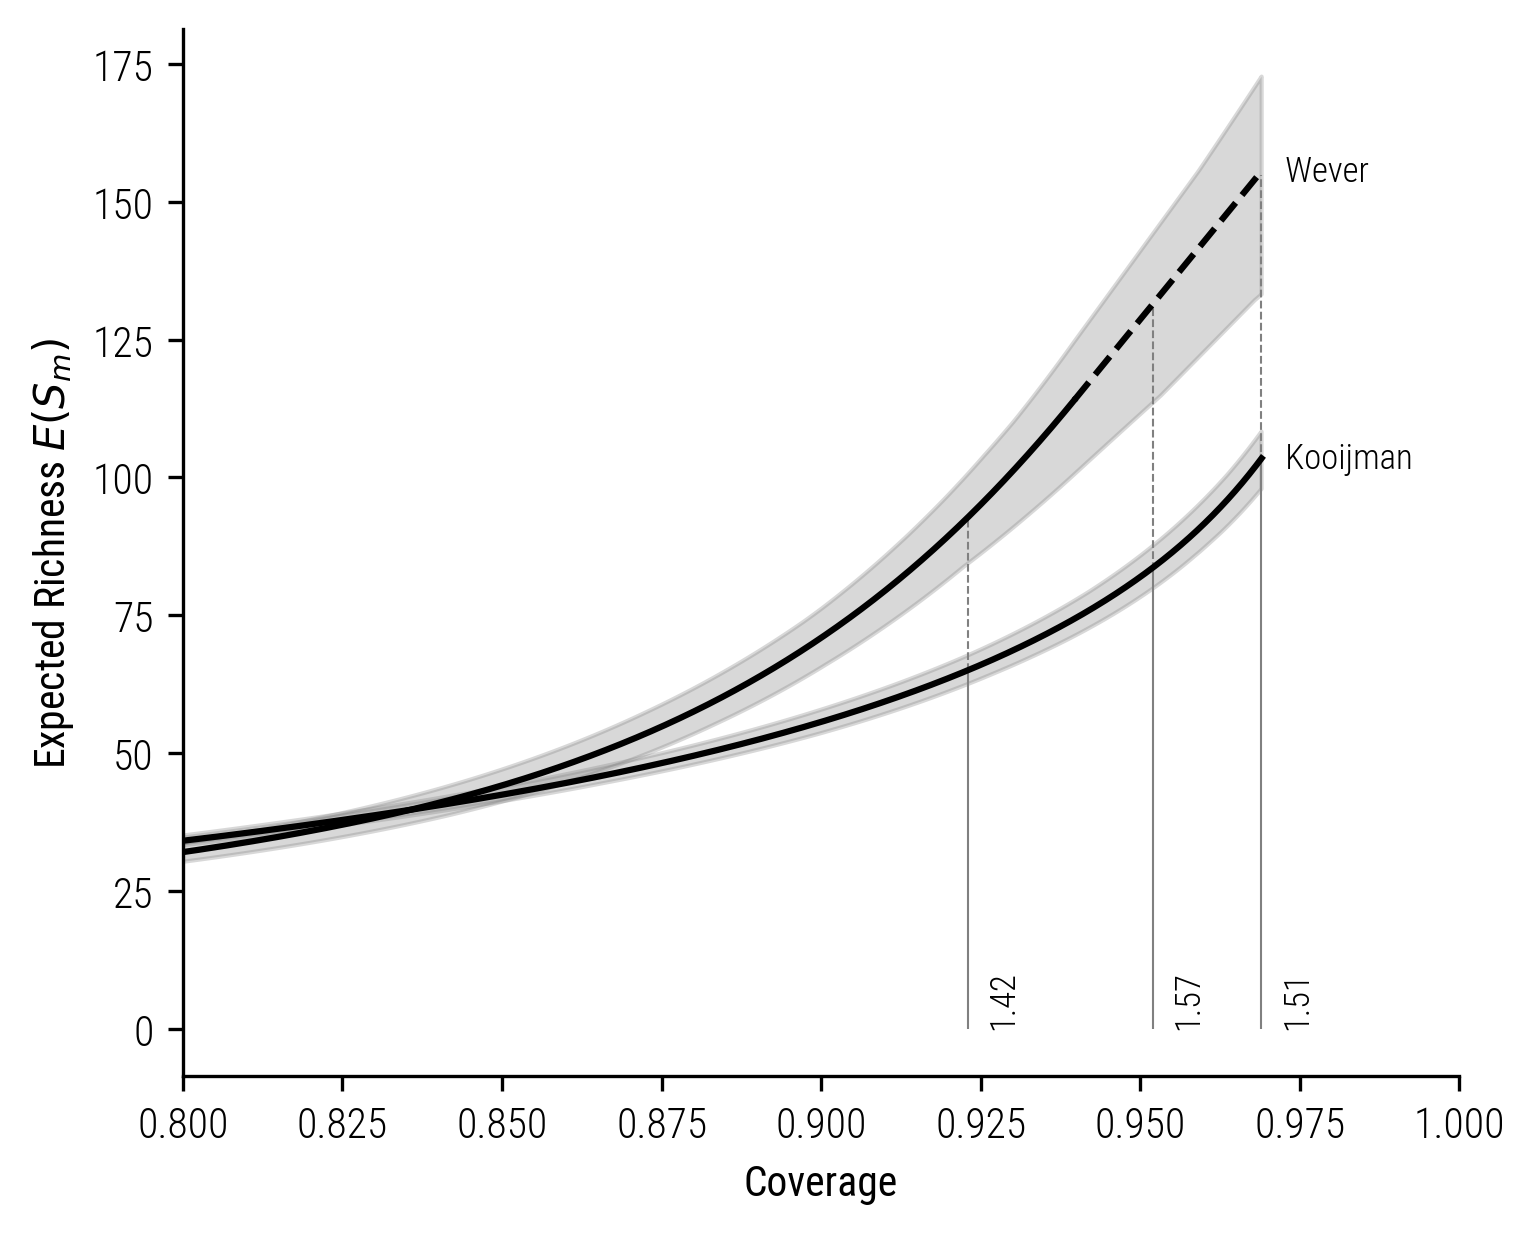 Figure 10: Coverage-based rarefaction-extrapolation curve for Kooijman and Wever.